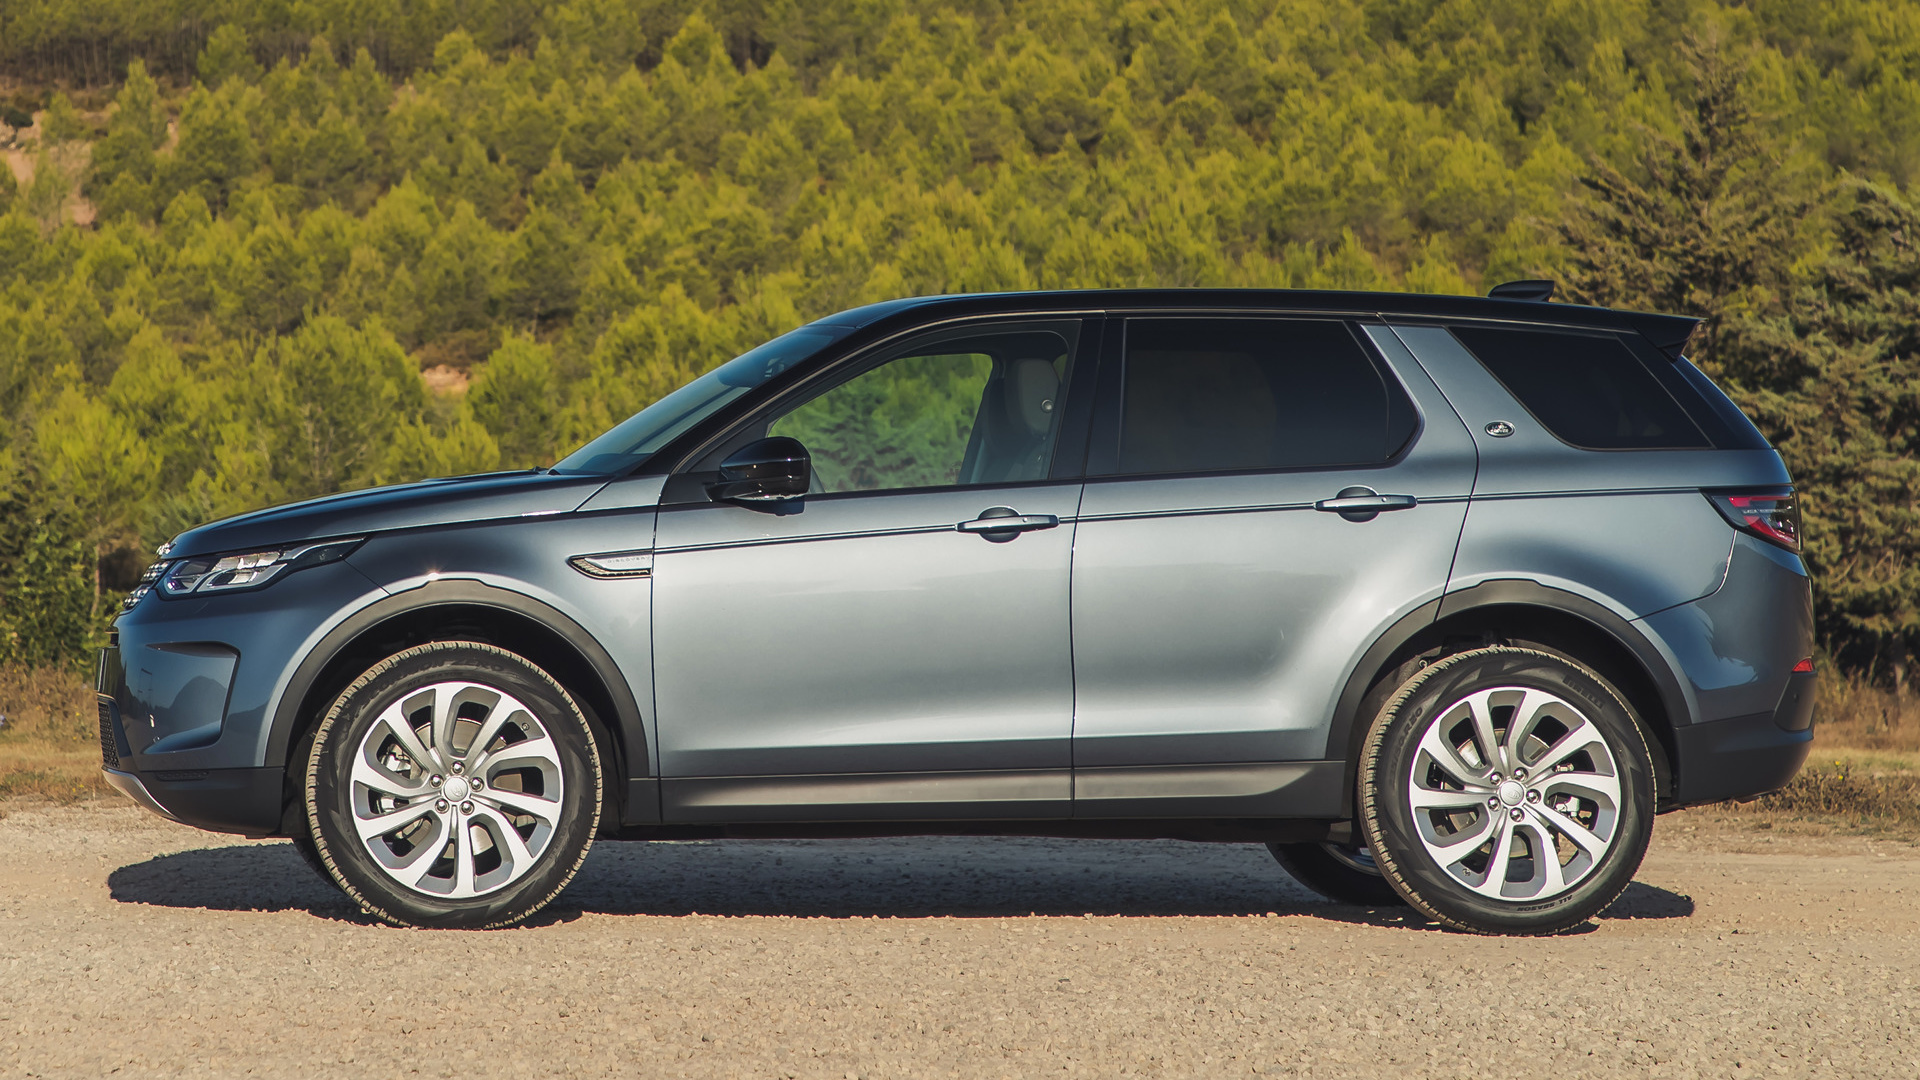 Car Land Rover Discovery Sport Suv Silver Car 1920x1080